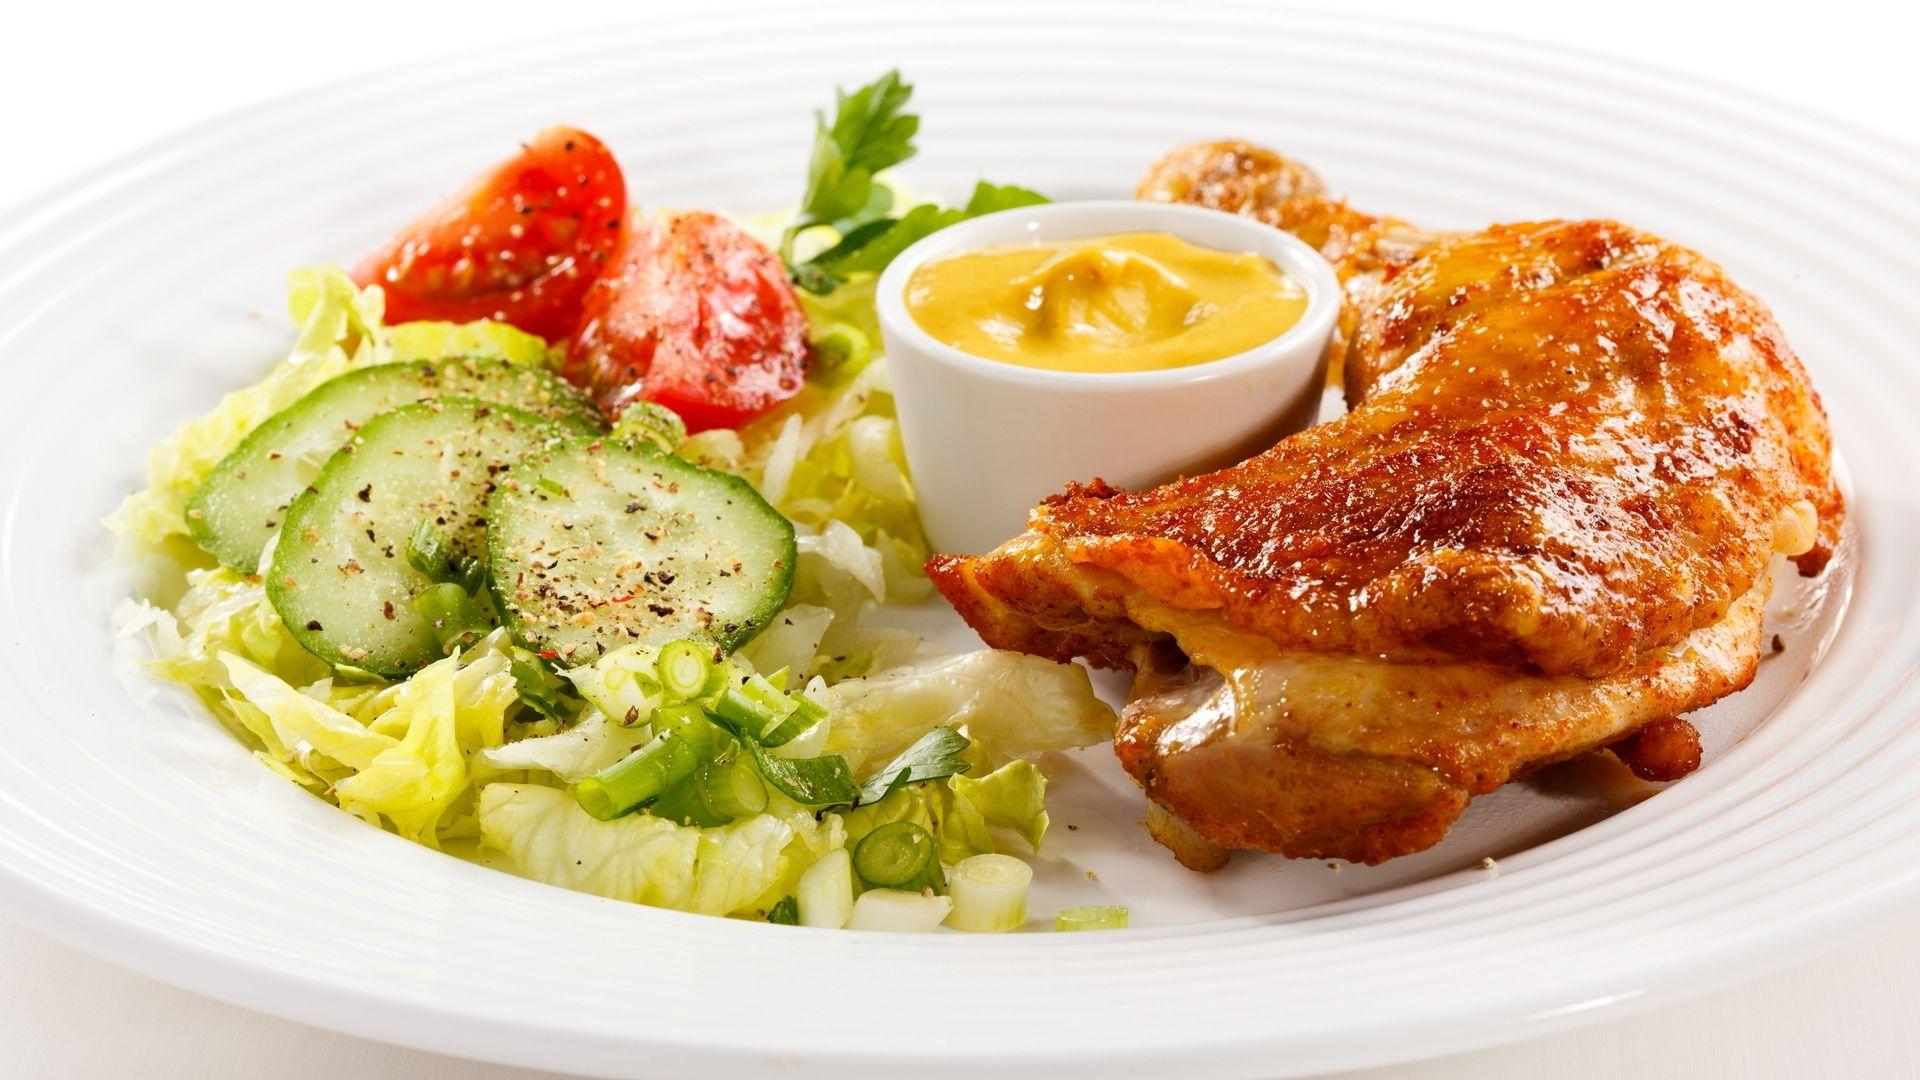 Download Wallpaper 1920x1080 Chicken, Salad, Sauce, Spices Full HD